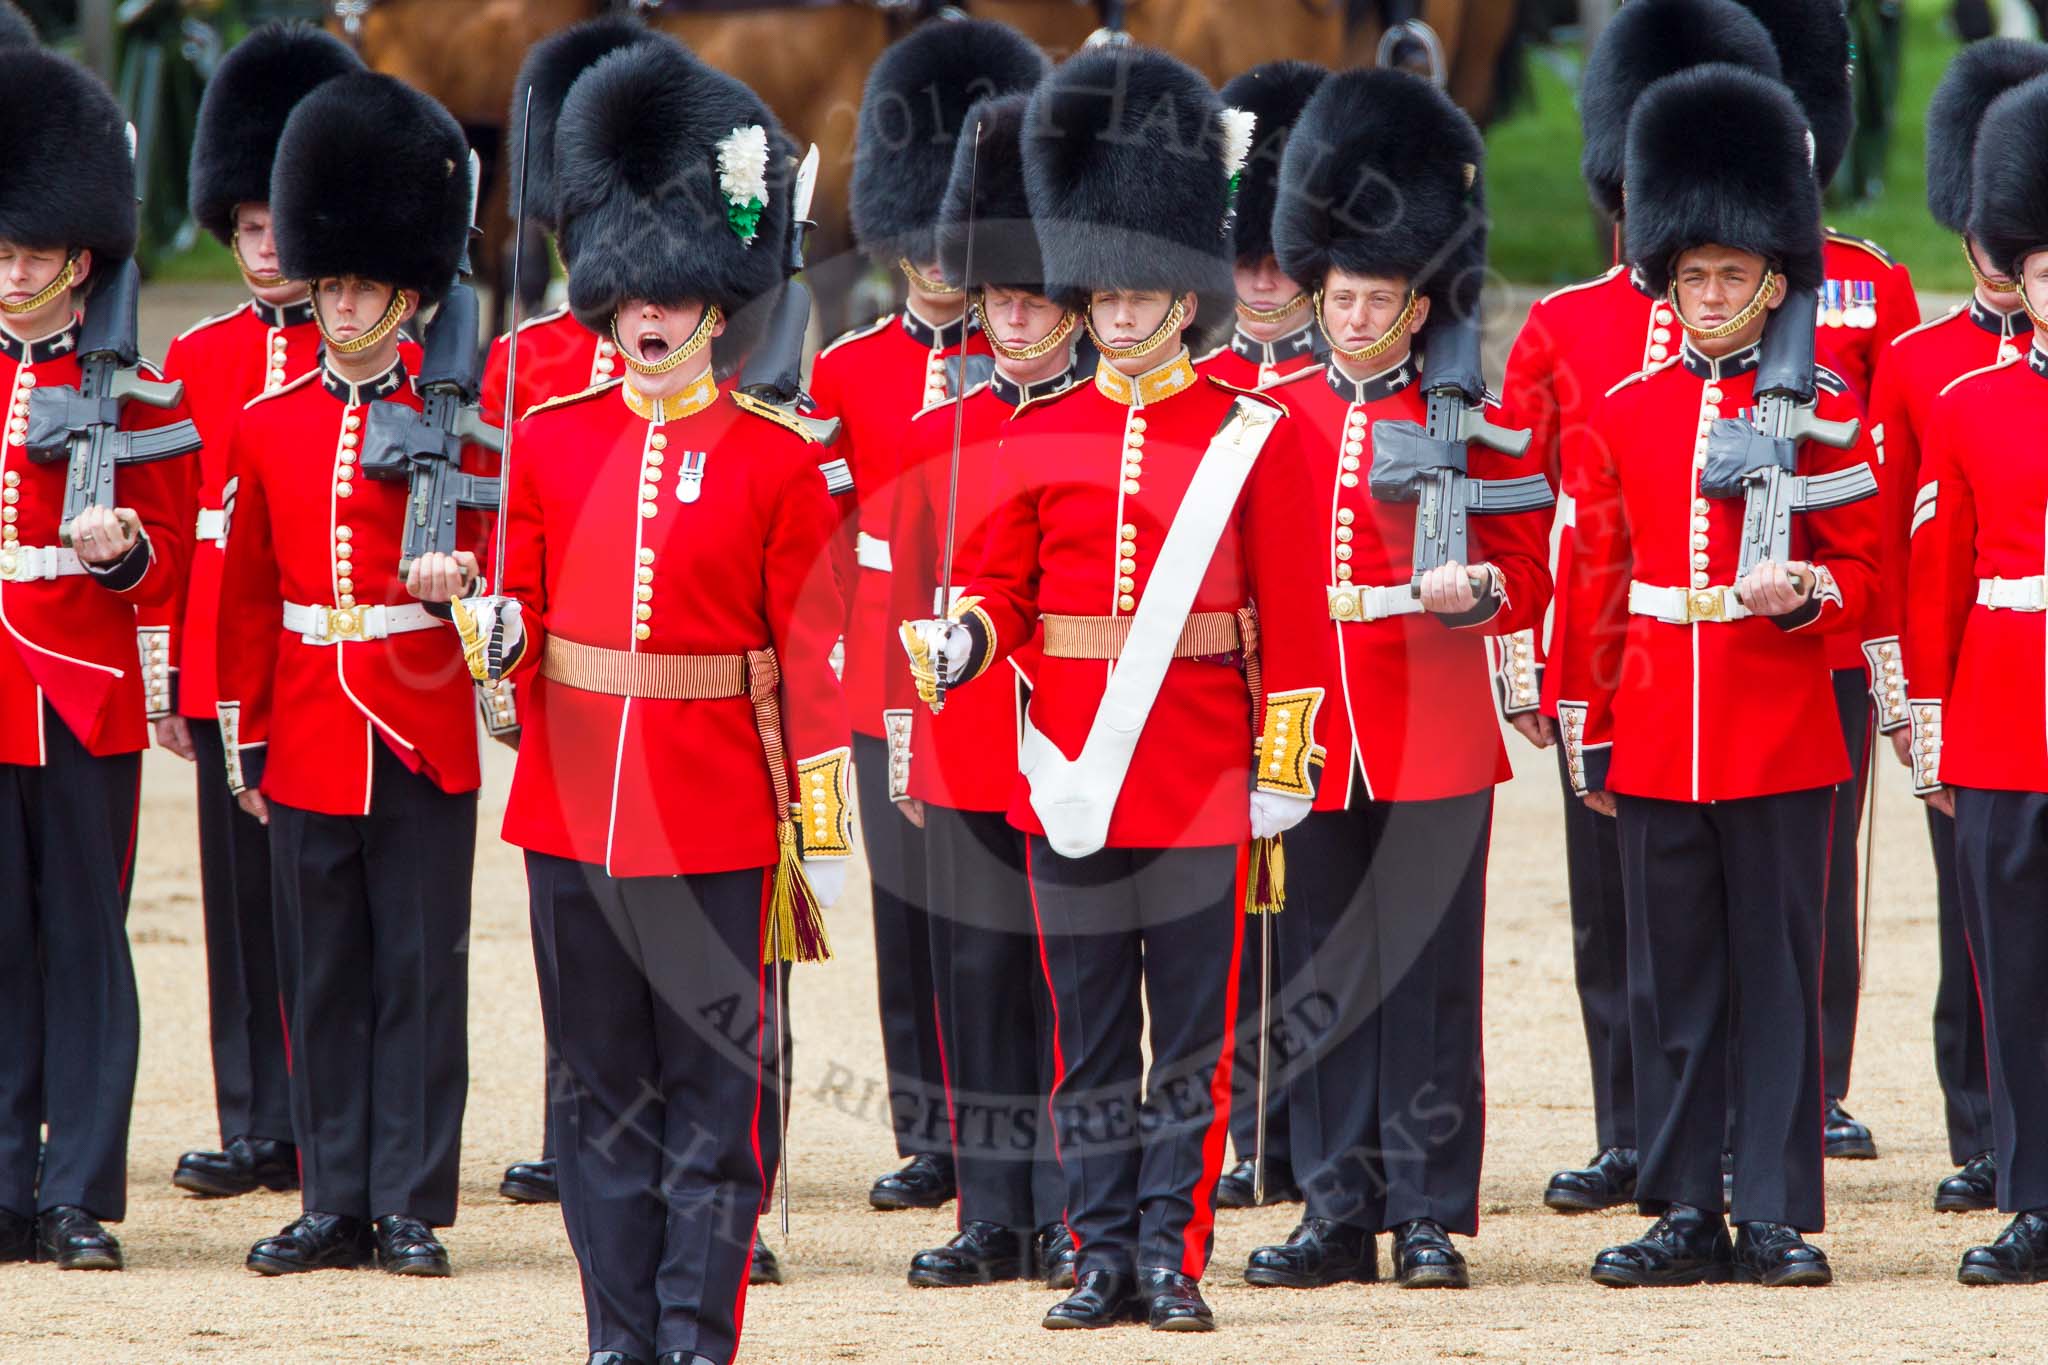 The Colonel's Review 2013: Captain F O Lloyd-George gives the orders for No. 1 Guard (Escort for the Colour),1st Battalion Welsh Guards to move into close order..
Horse Guards Parade, Westminster,
London SW1,

United Kingdom,
on 08 June 2013 at 11:15, image #480